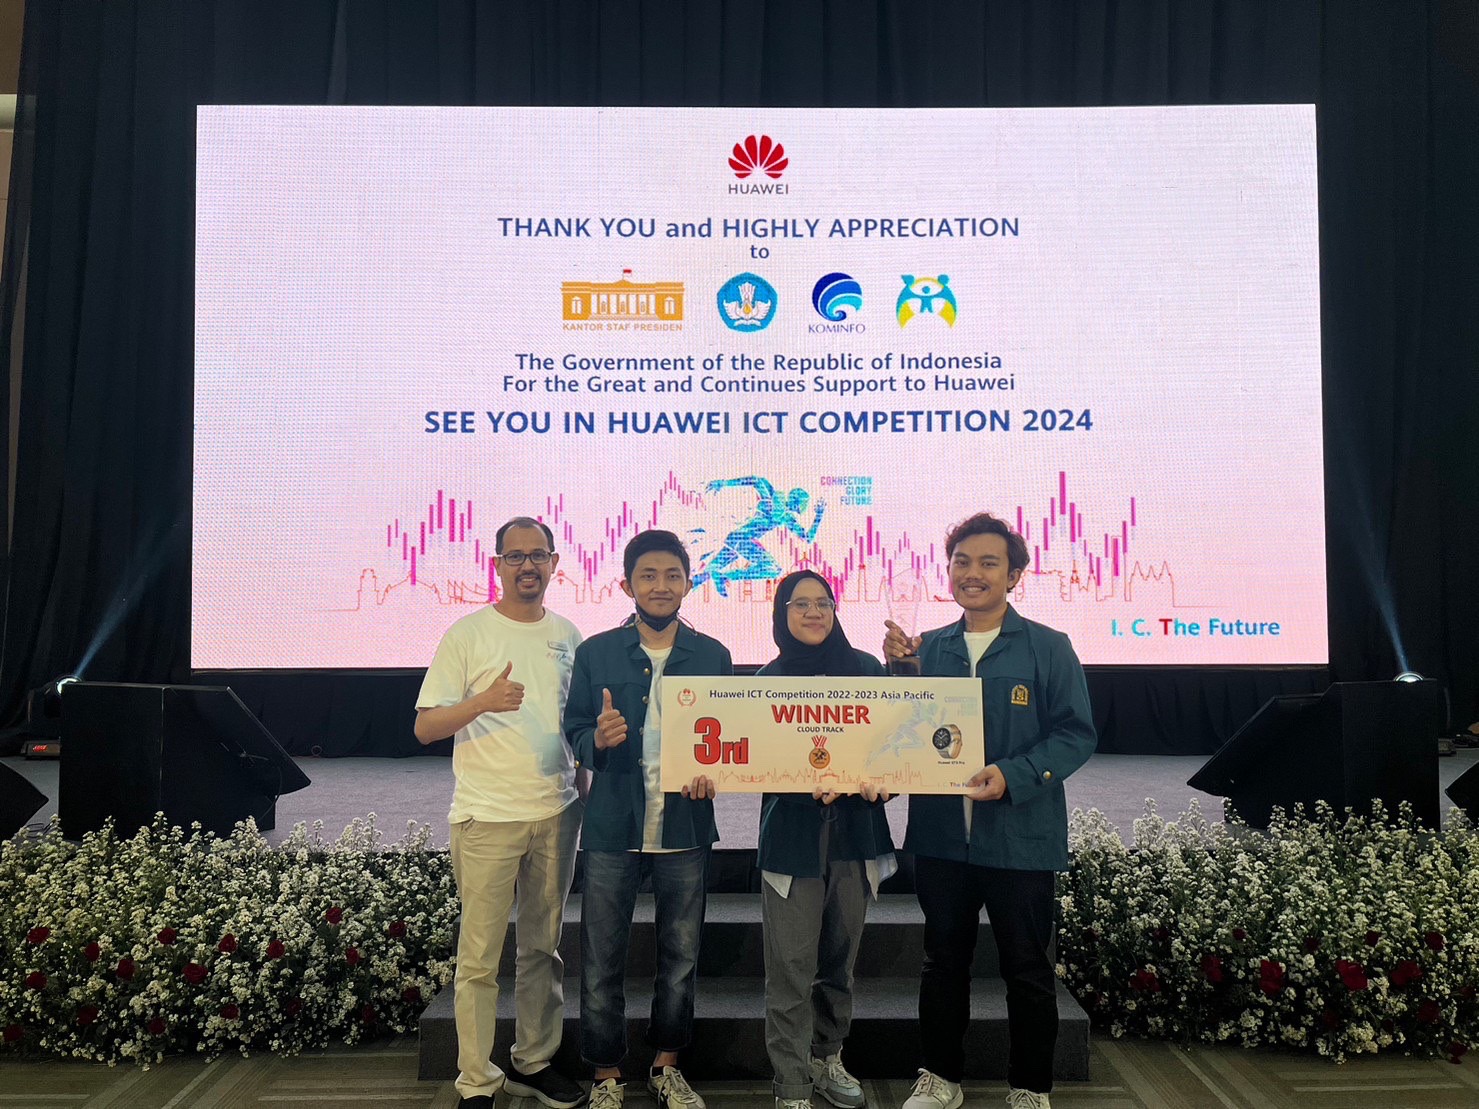 itb-team-achieves-cloud-track-success-in-huawei-ict-competition-2023-at-regional-and-global-levels